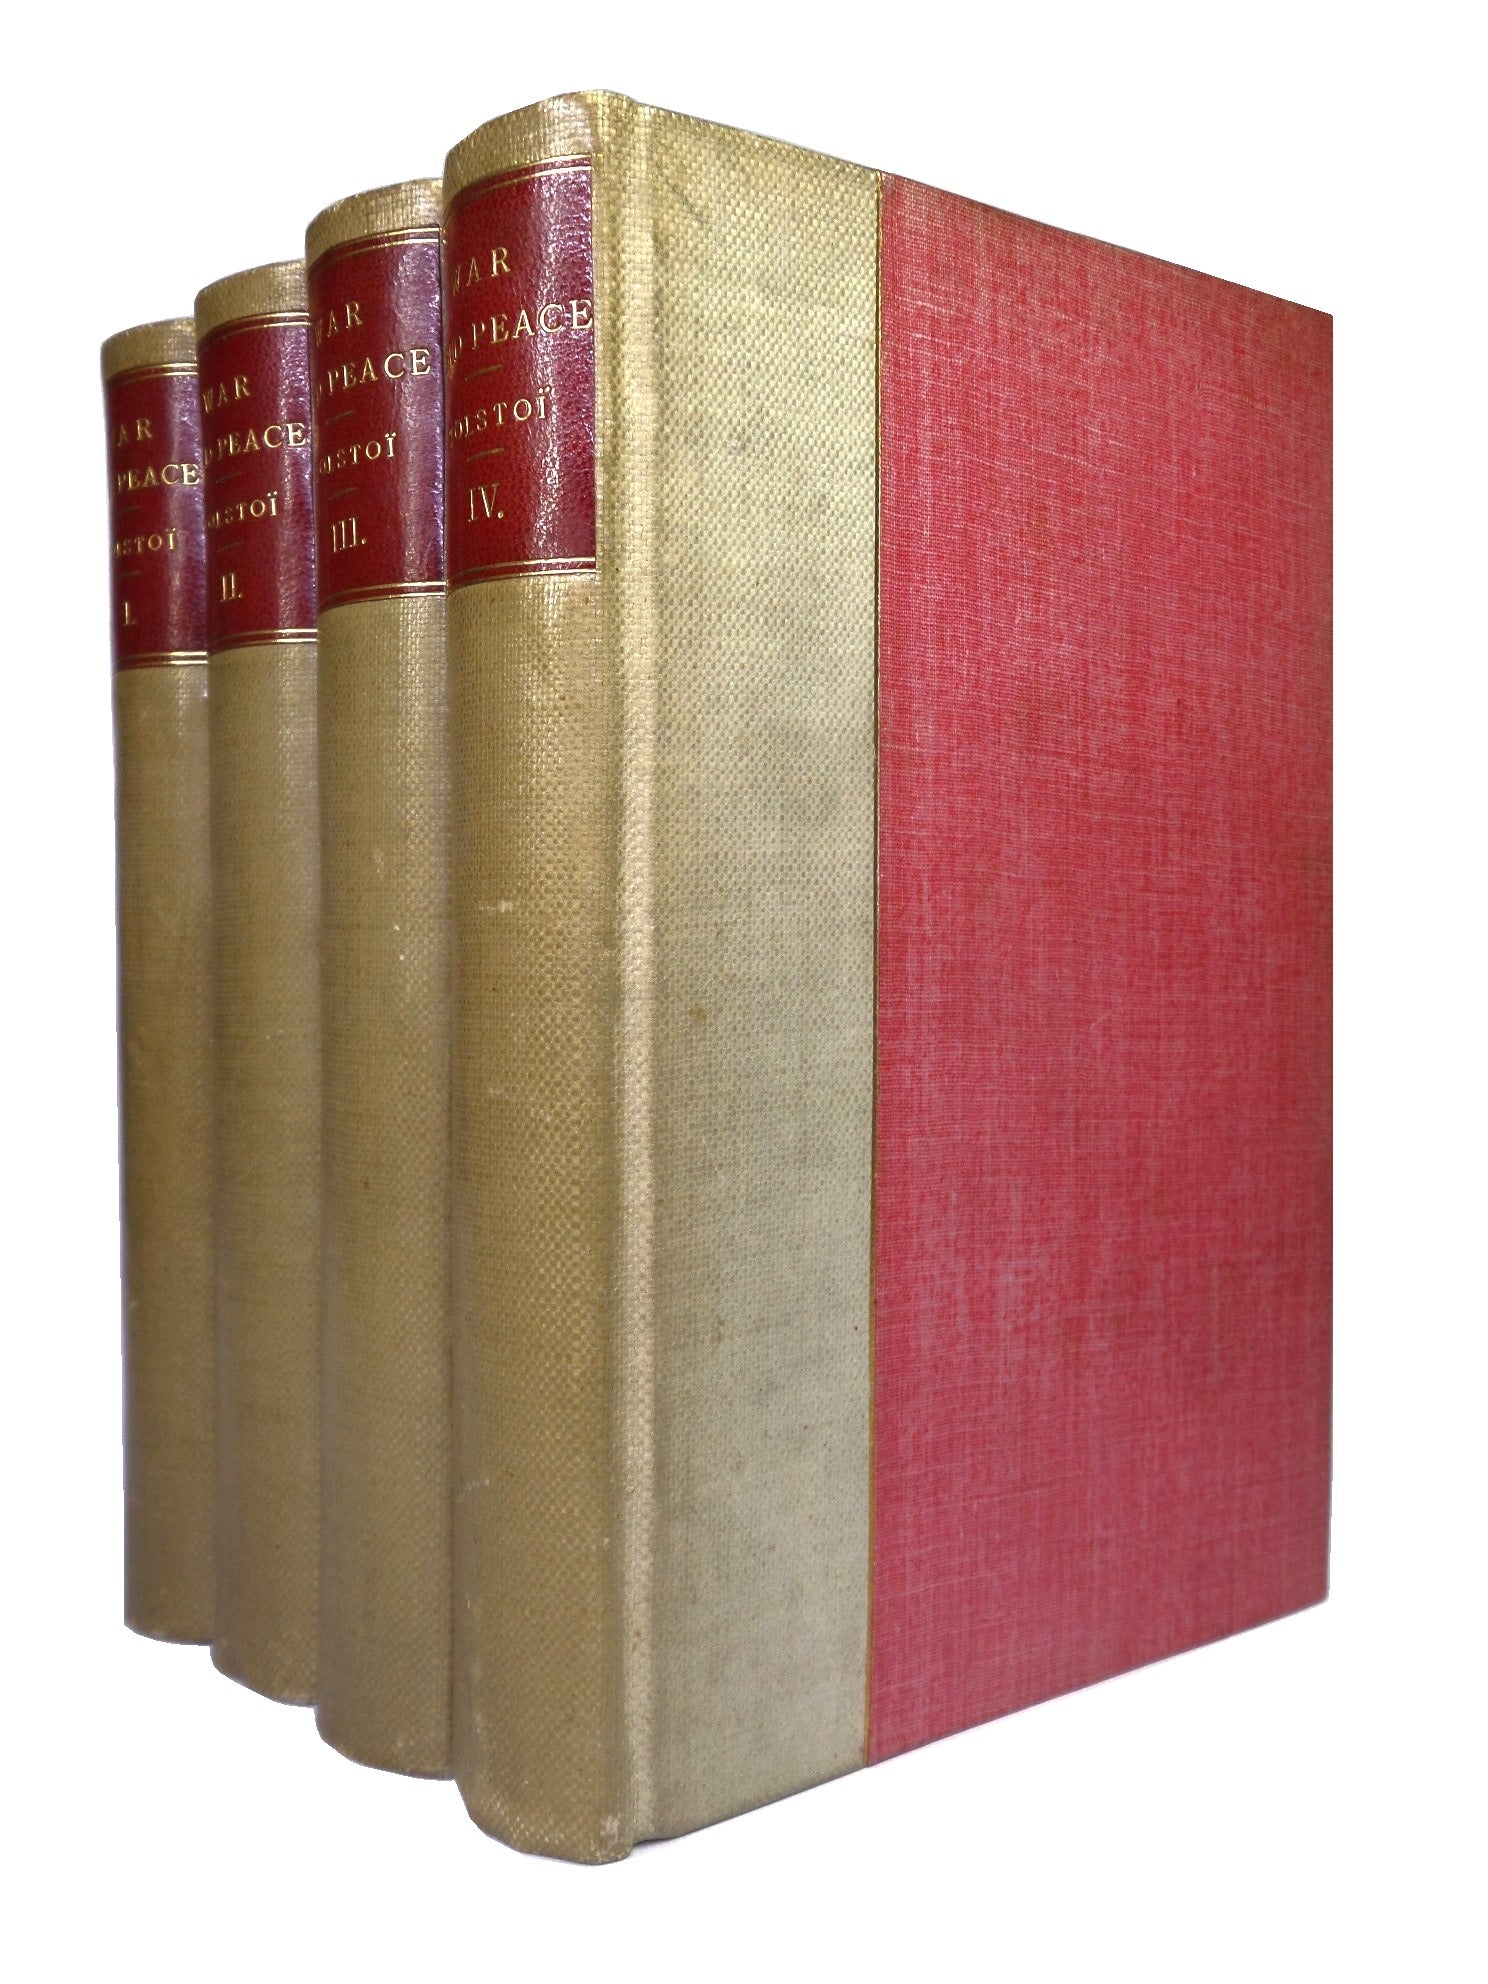 WAR AND PEACE BY LEO TOLSTOY 1889 FIRST UK EDITION, IN FOUR VOLUMES